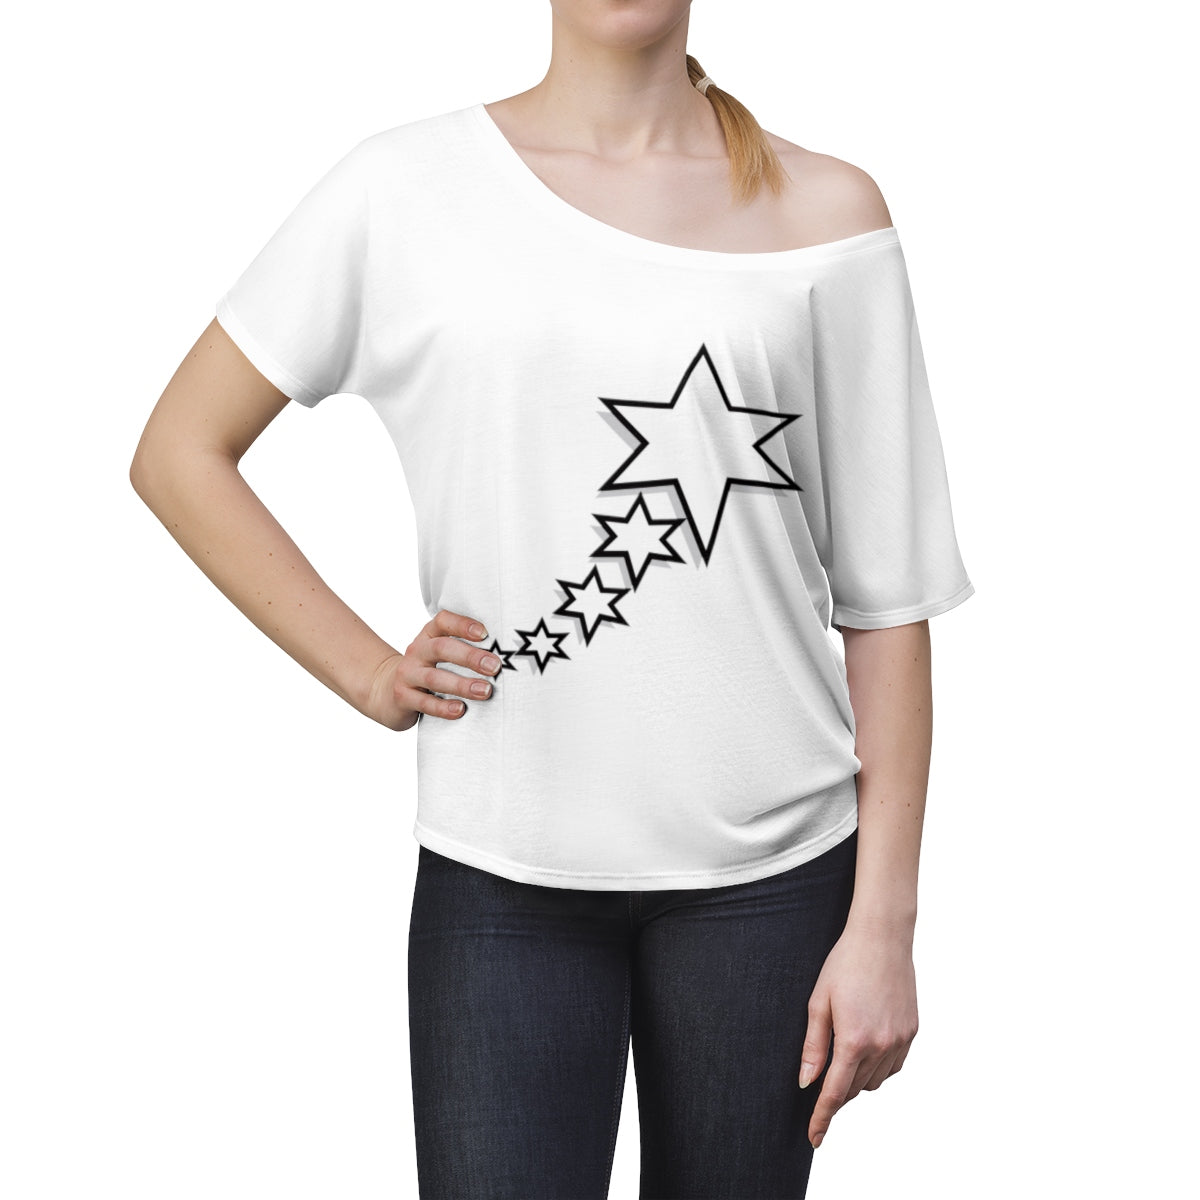 Women's Slouchy top - 6 Points 5 Stars (White)